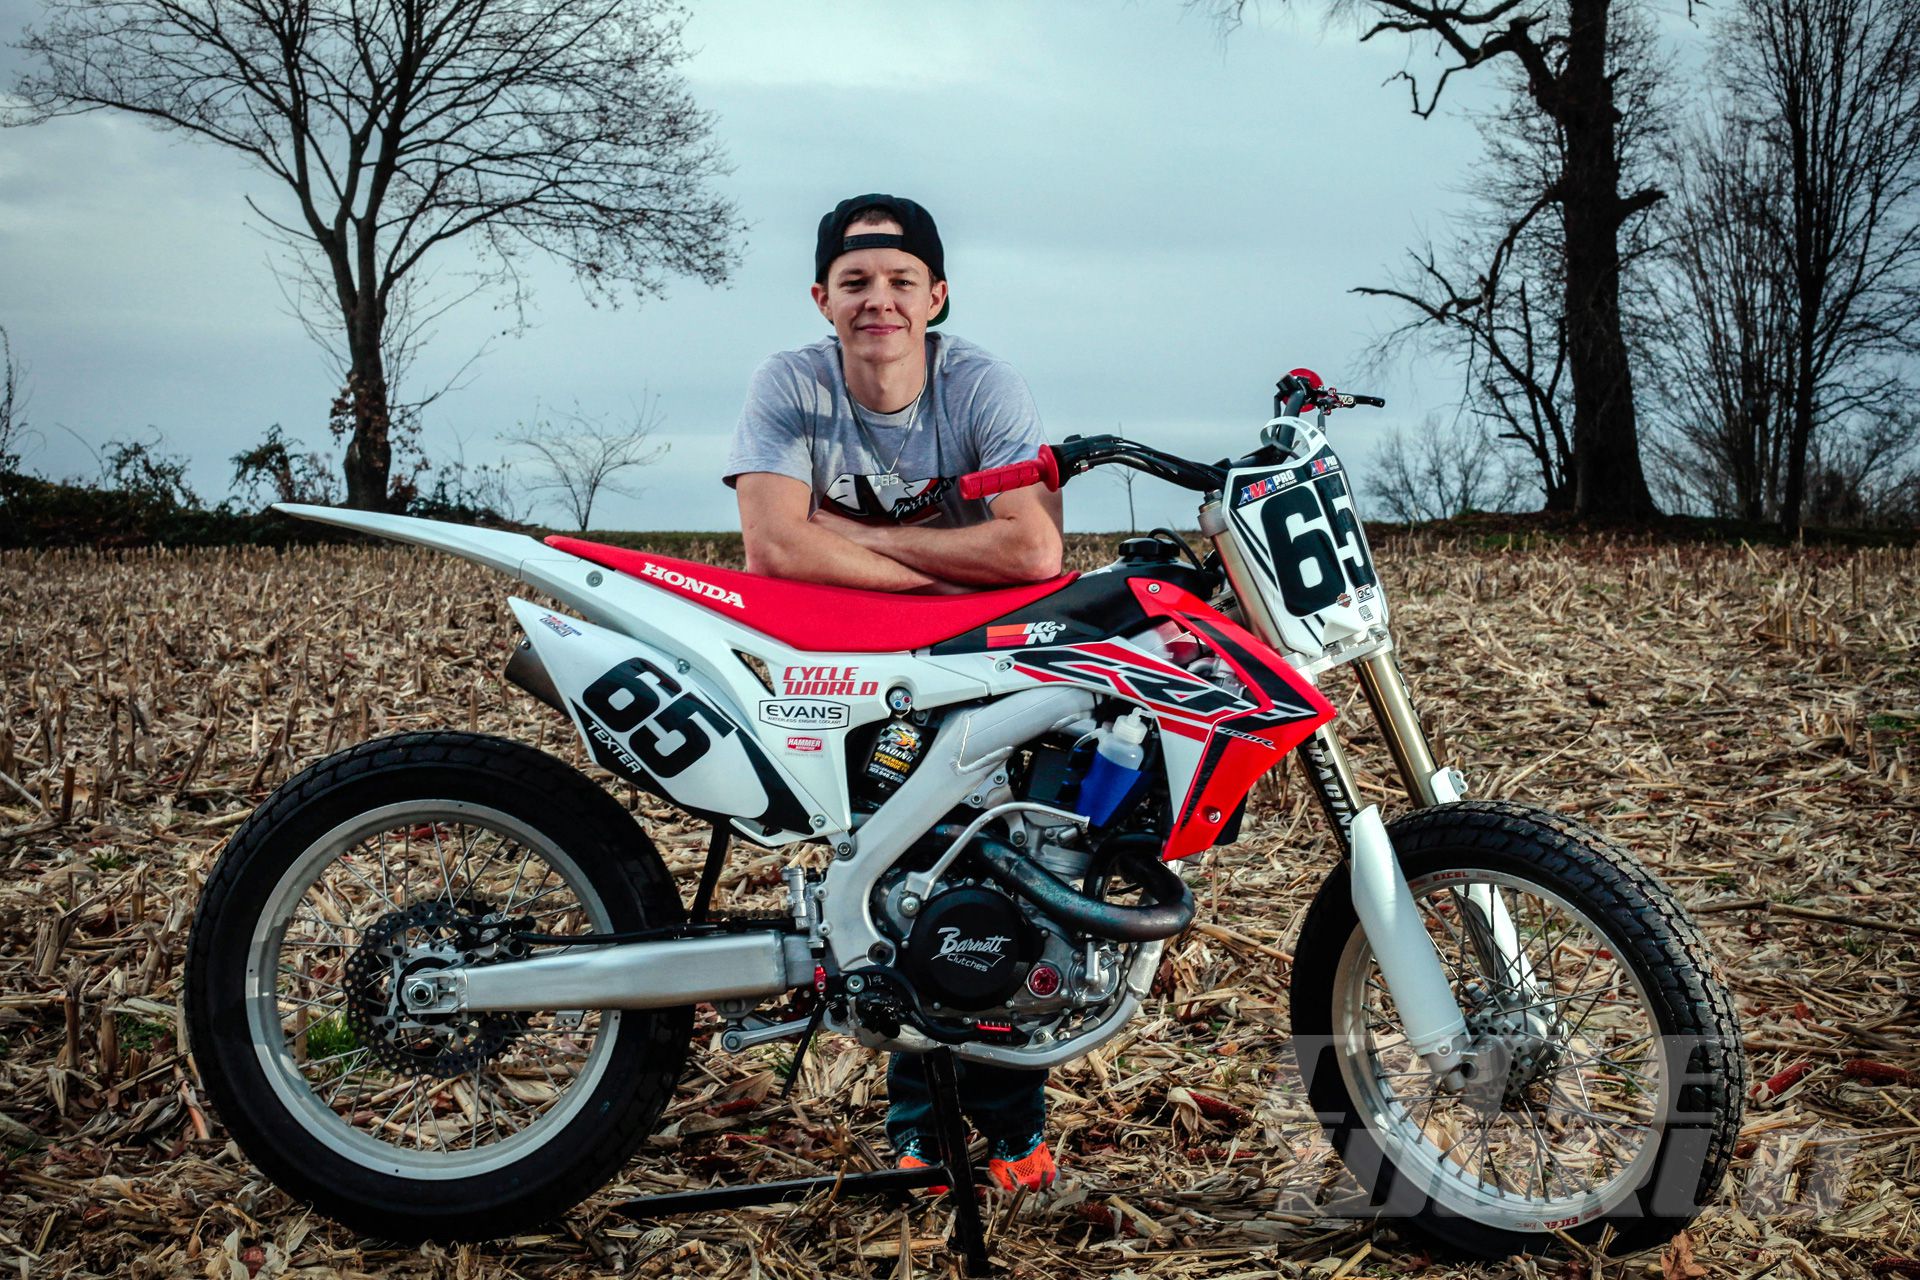 How To Build A Honda Crf450r Flat Tracker Racing Motorcycle Cycle World